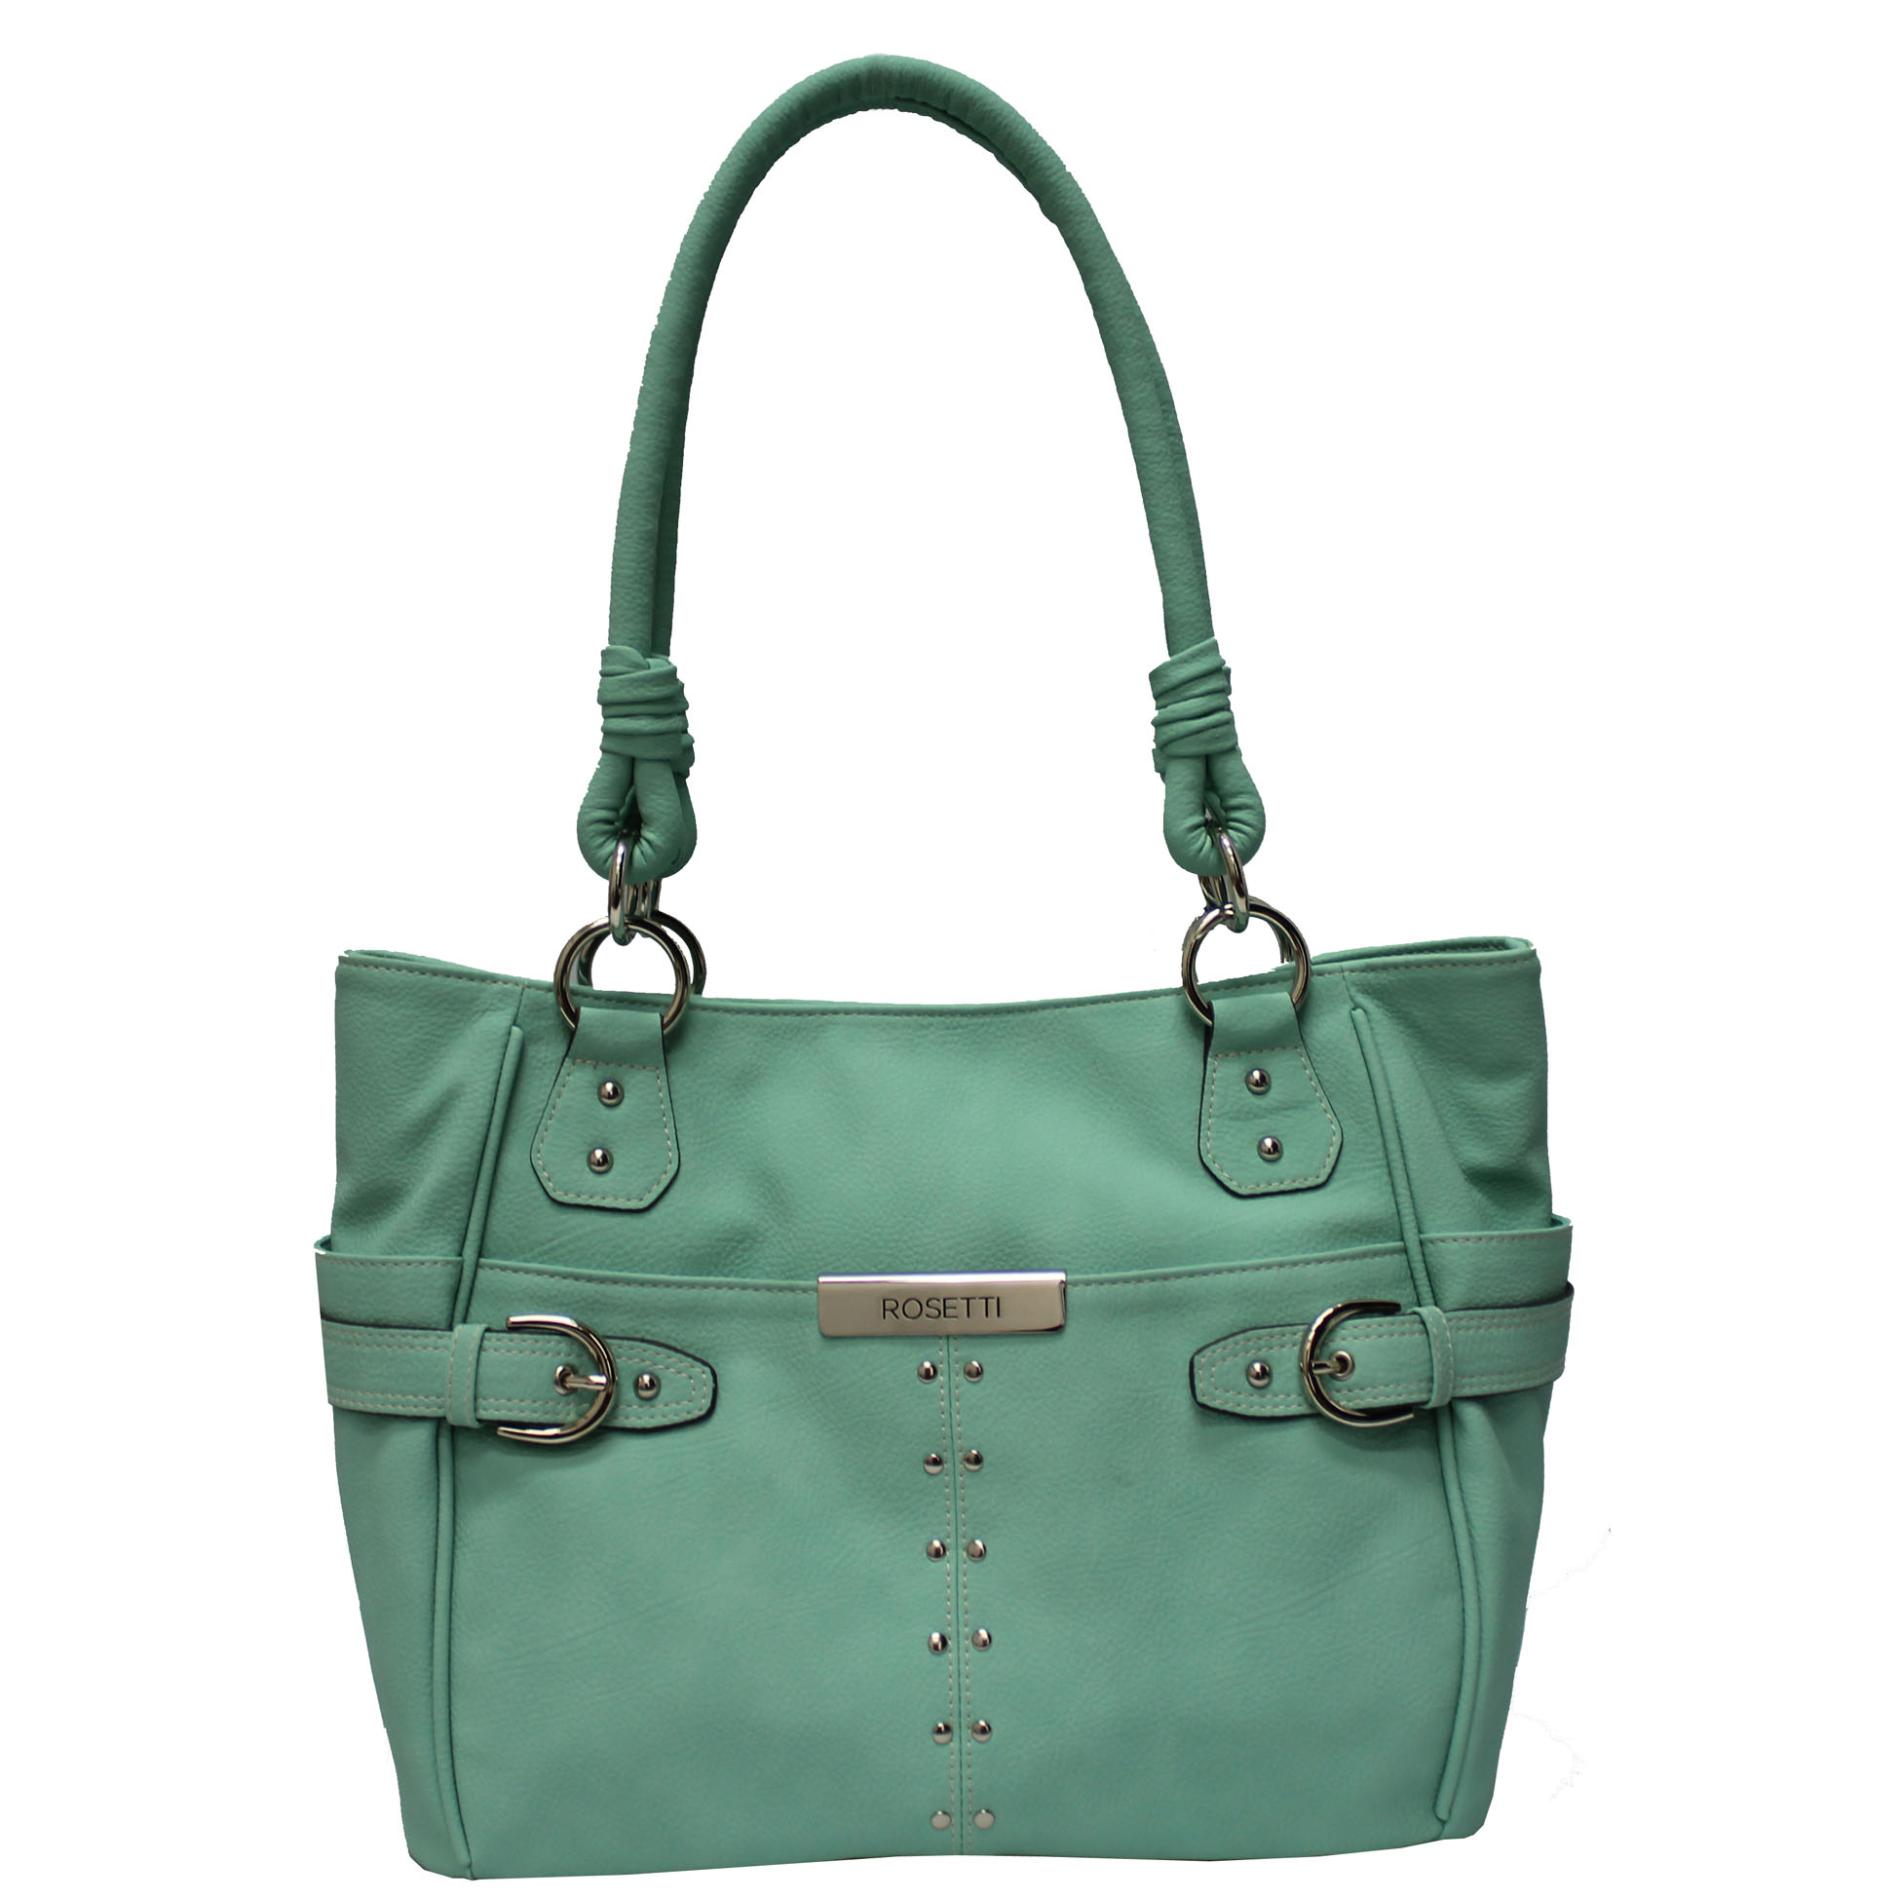 Rosetti Women's Ring in the Tides Tote Bag